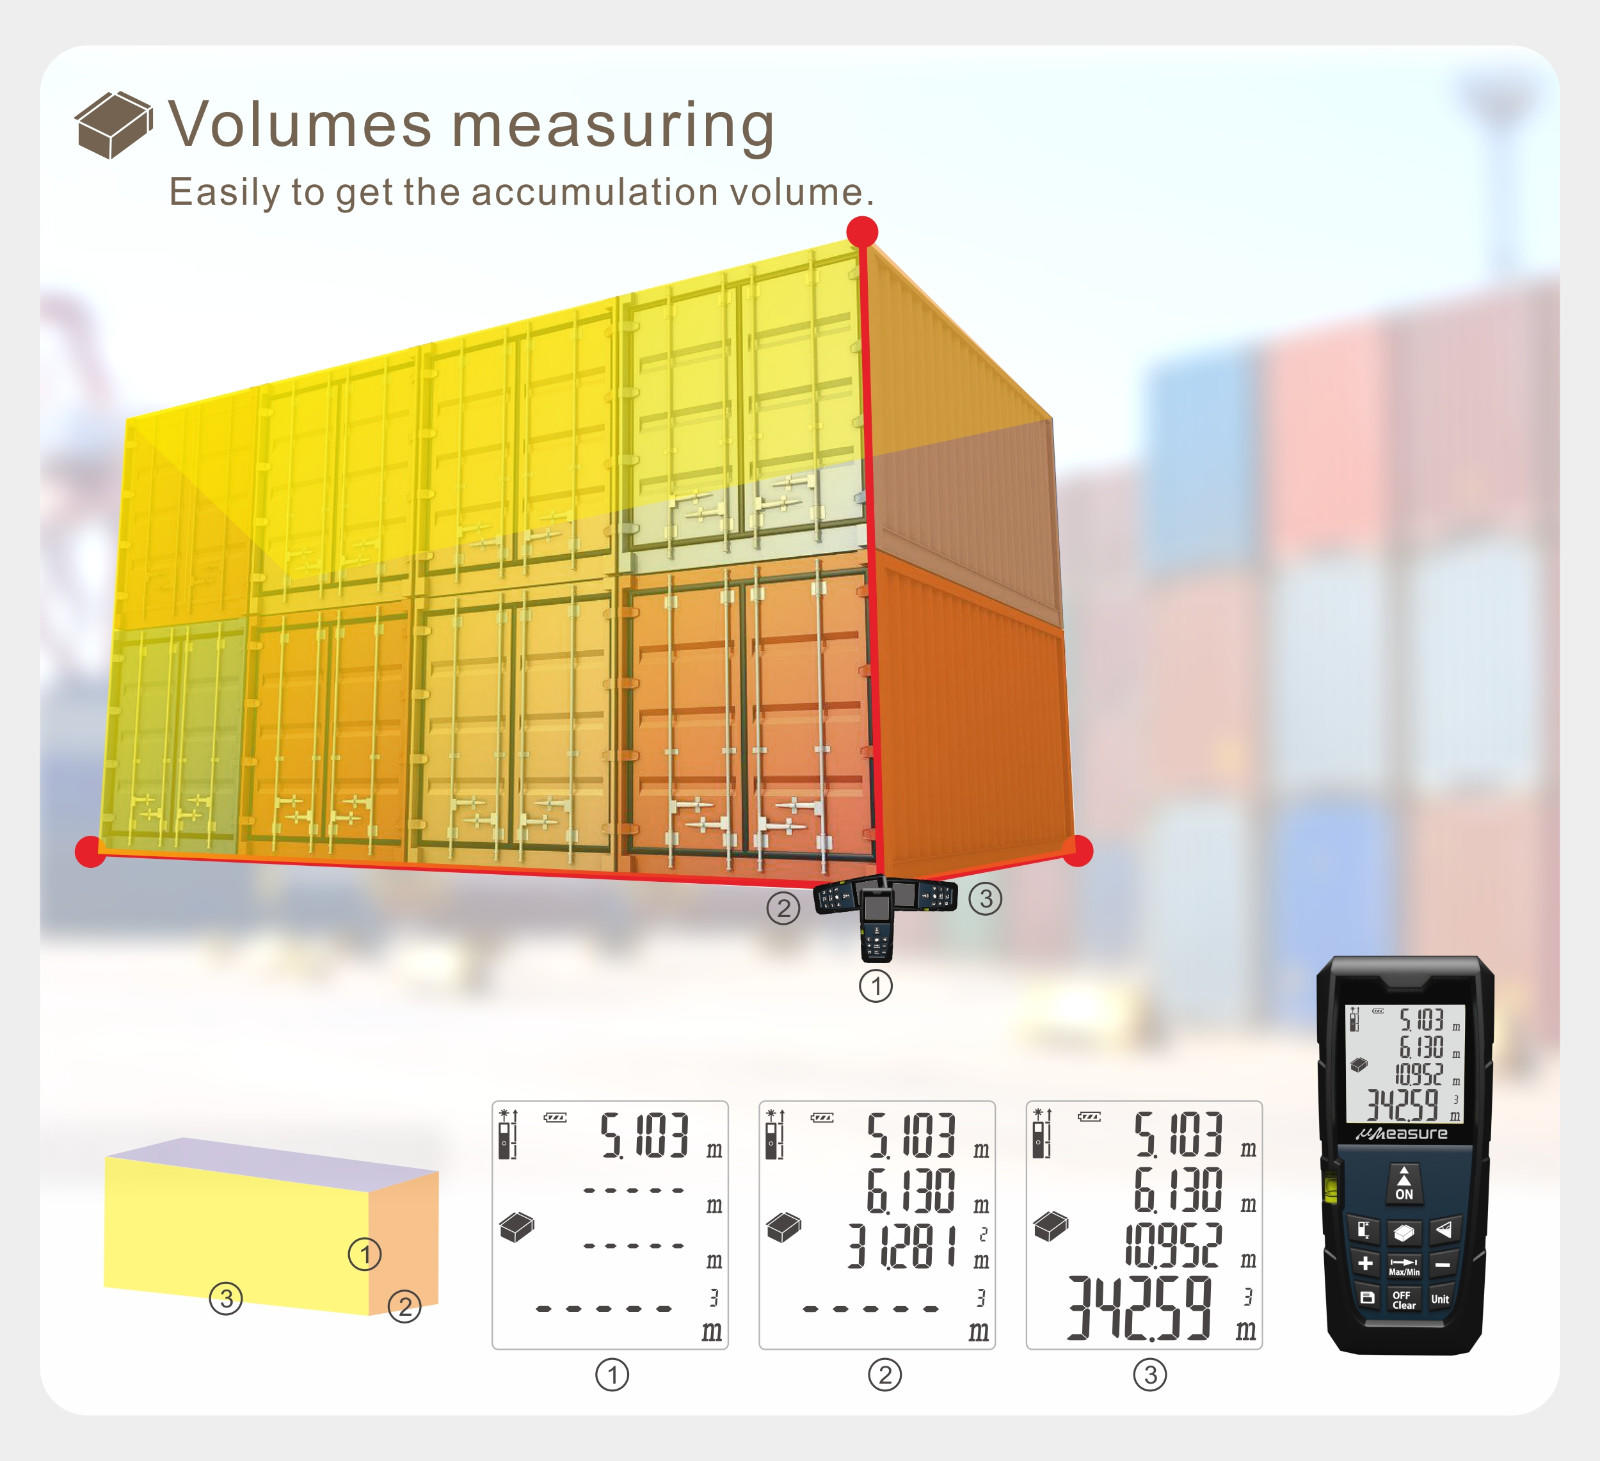 UMeasure carrying laser measuring device manufacturers measurement for worker